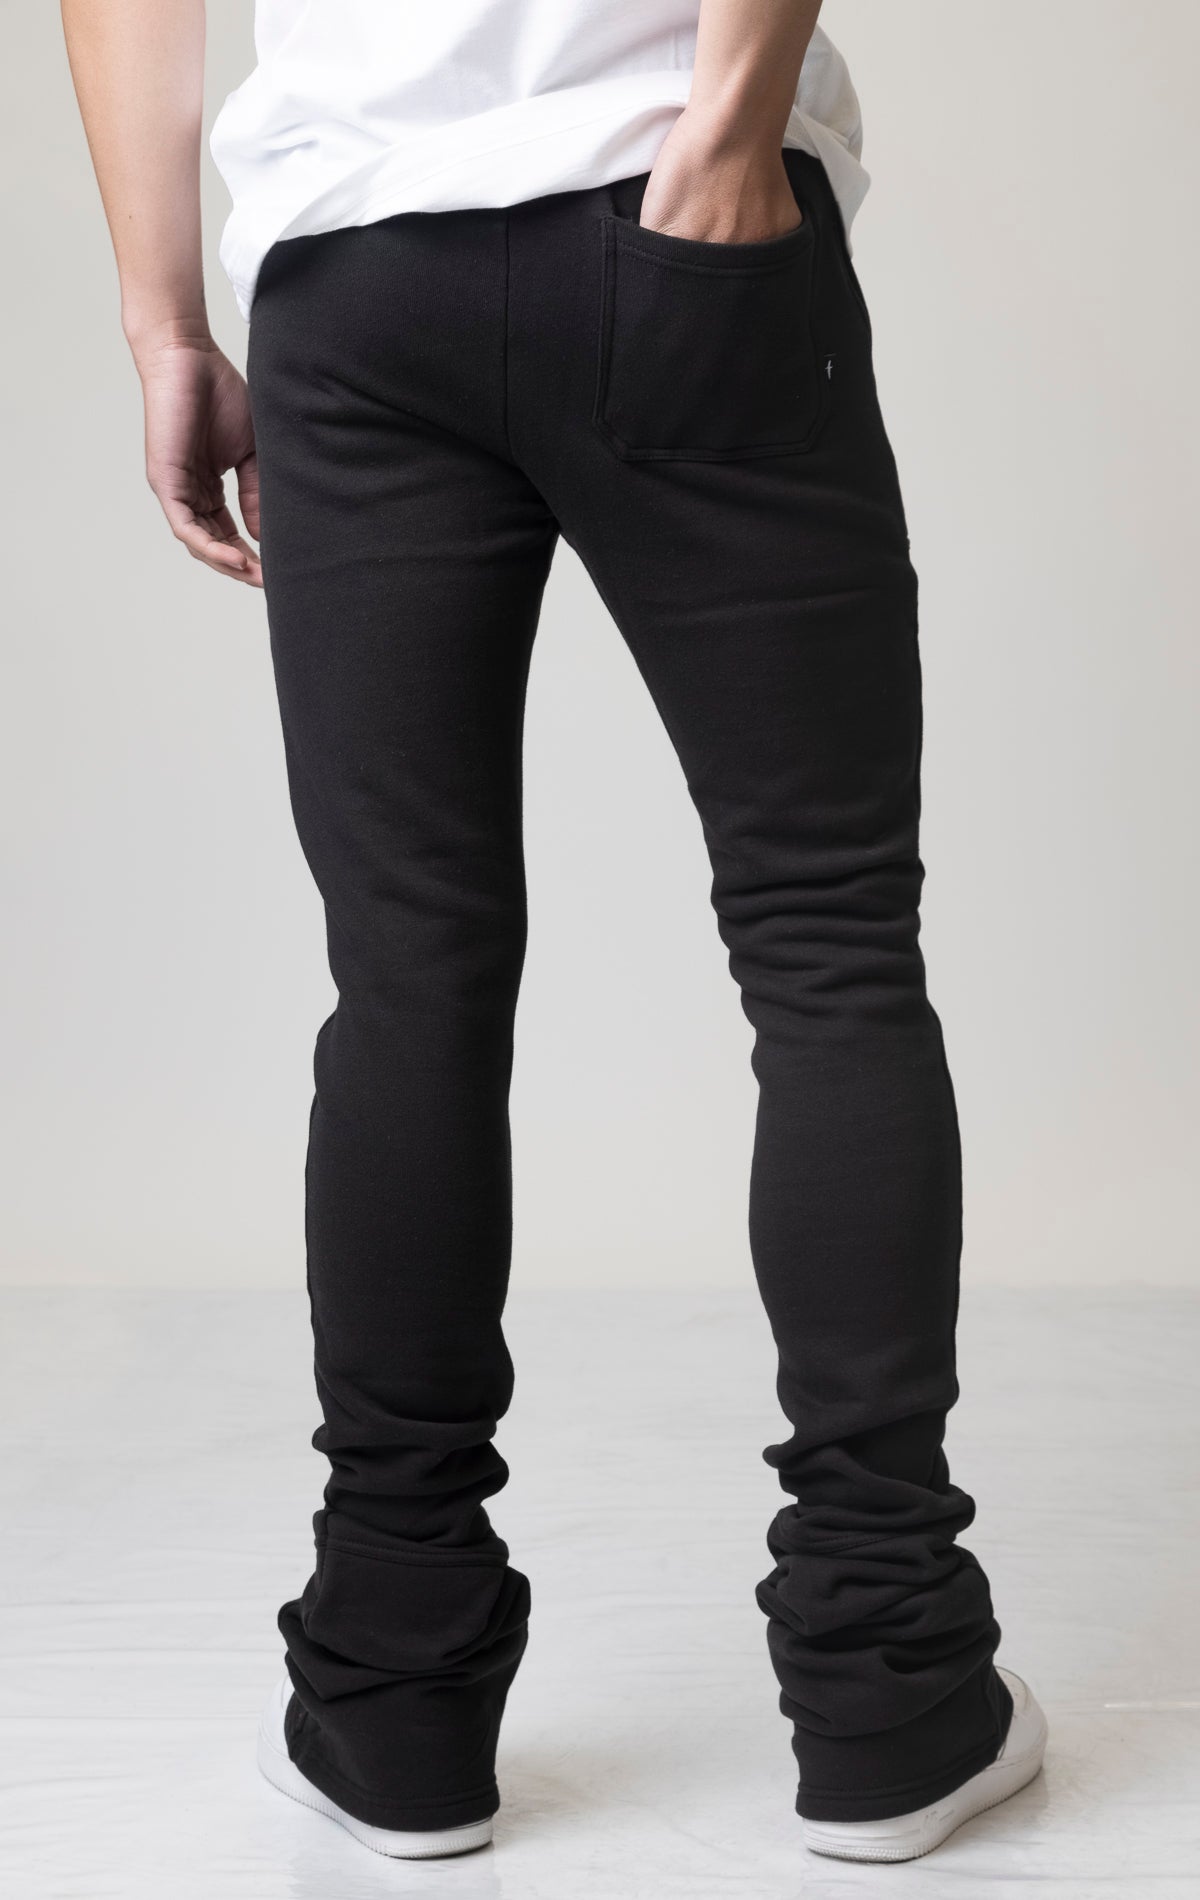 Black Core Dagger Super Stacked Joggers feature a unique, stacked leg design for a stylish look.  Subtle embroidered branding adds a touch of detail. The joggers are made from a comfortable blend of 80% cotton and 20% polyester for all-day wear. An elastic waistband and pockets offer both convenience and functionality.